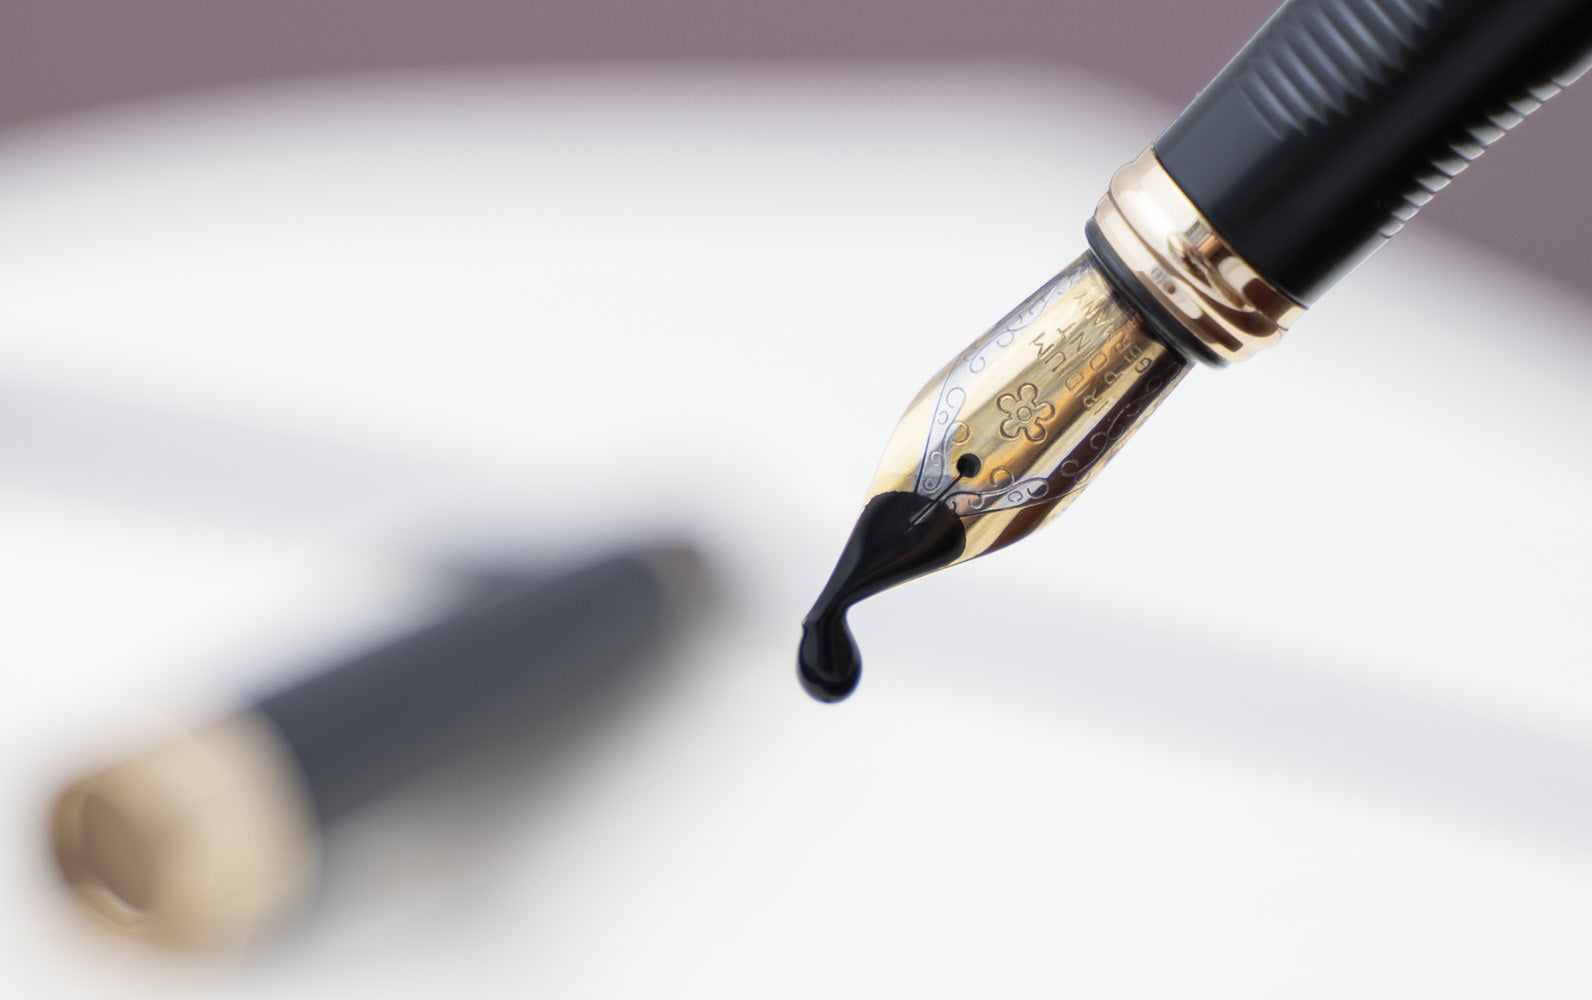 Drip of Ink Falling Out of a Fountain Pen